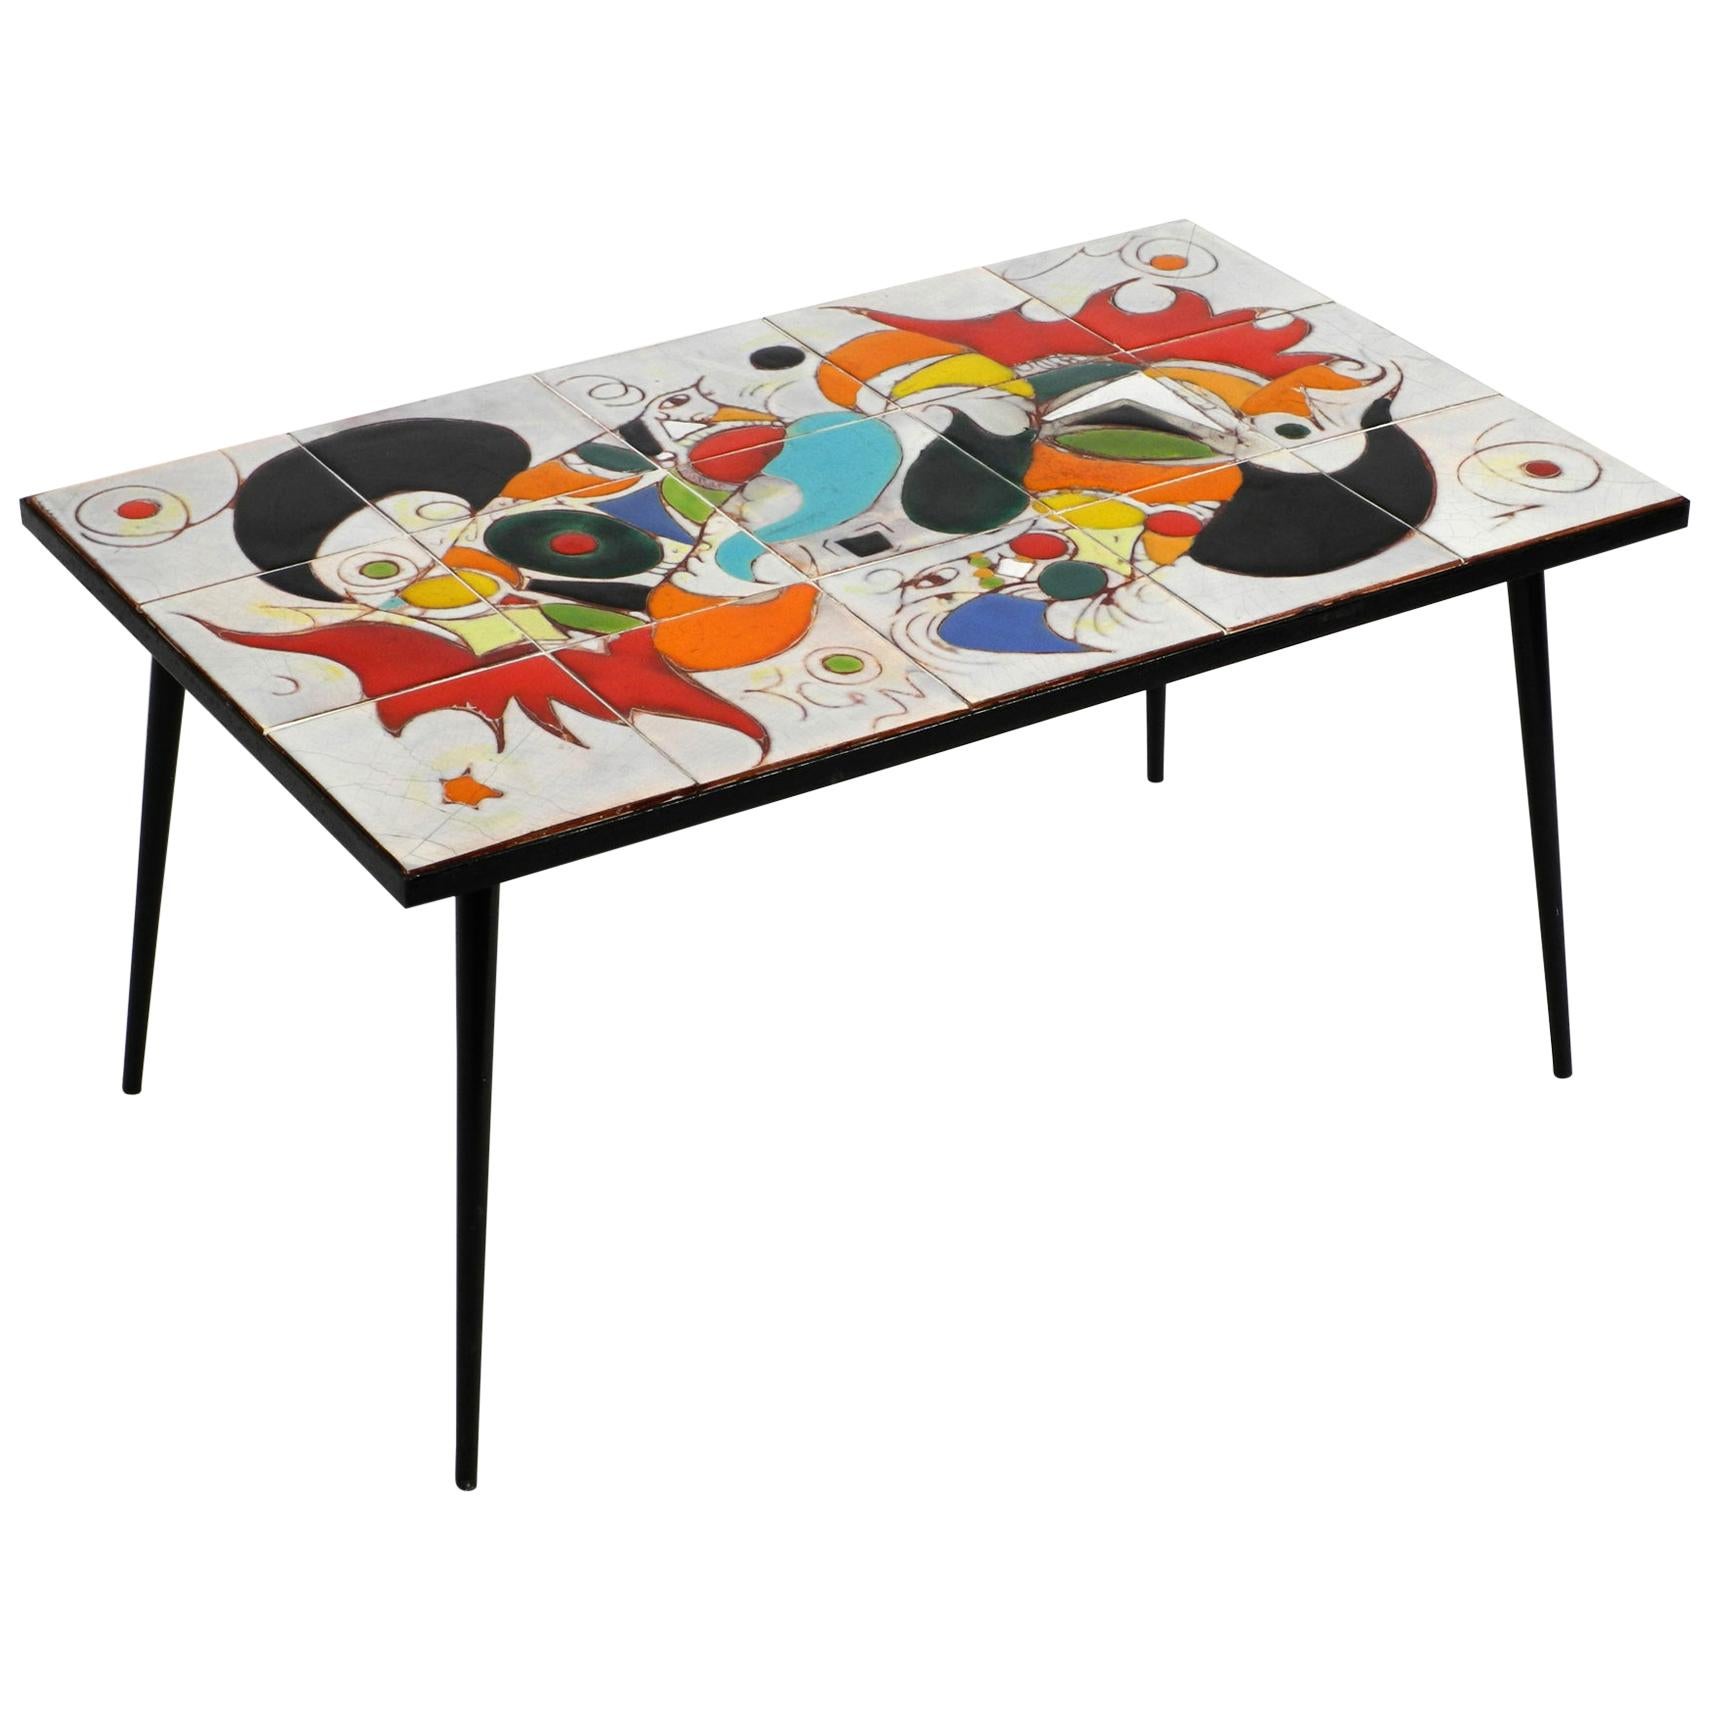 Midcentury Italian Modern Iron Table with Tiled Top and Abstract Motif For Sale